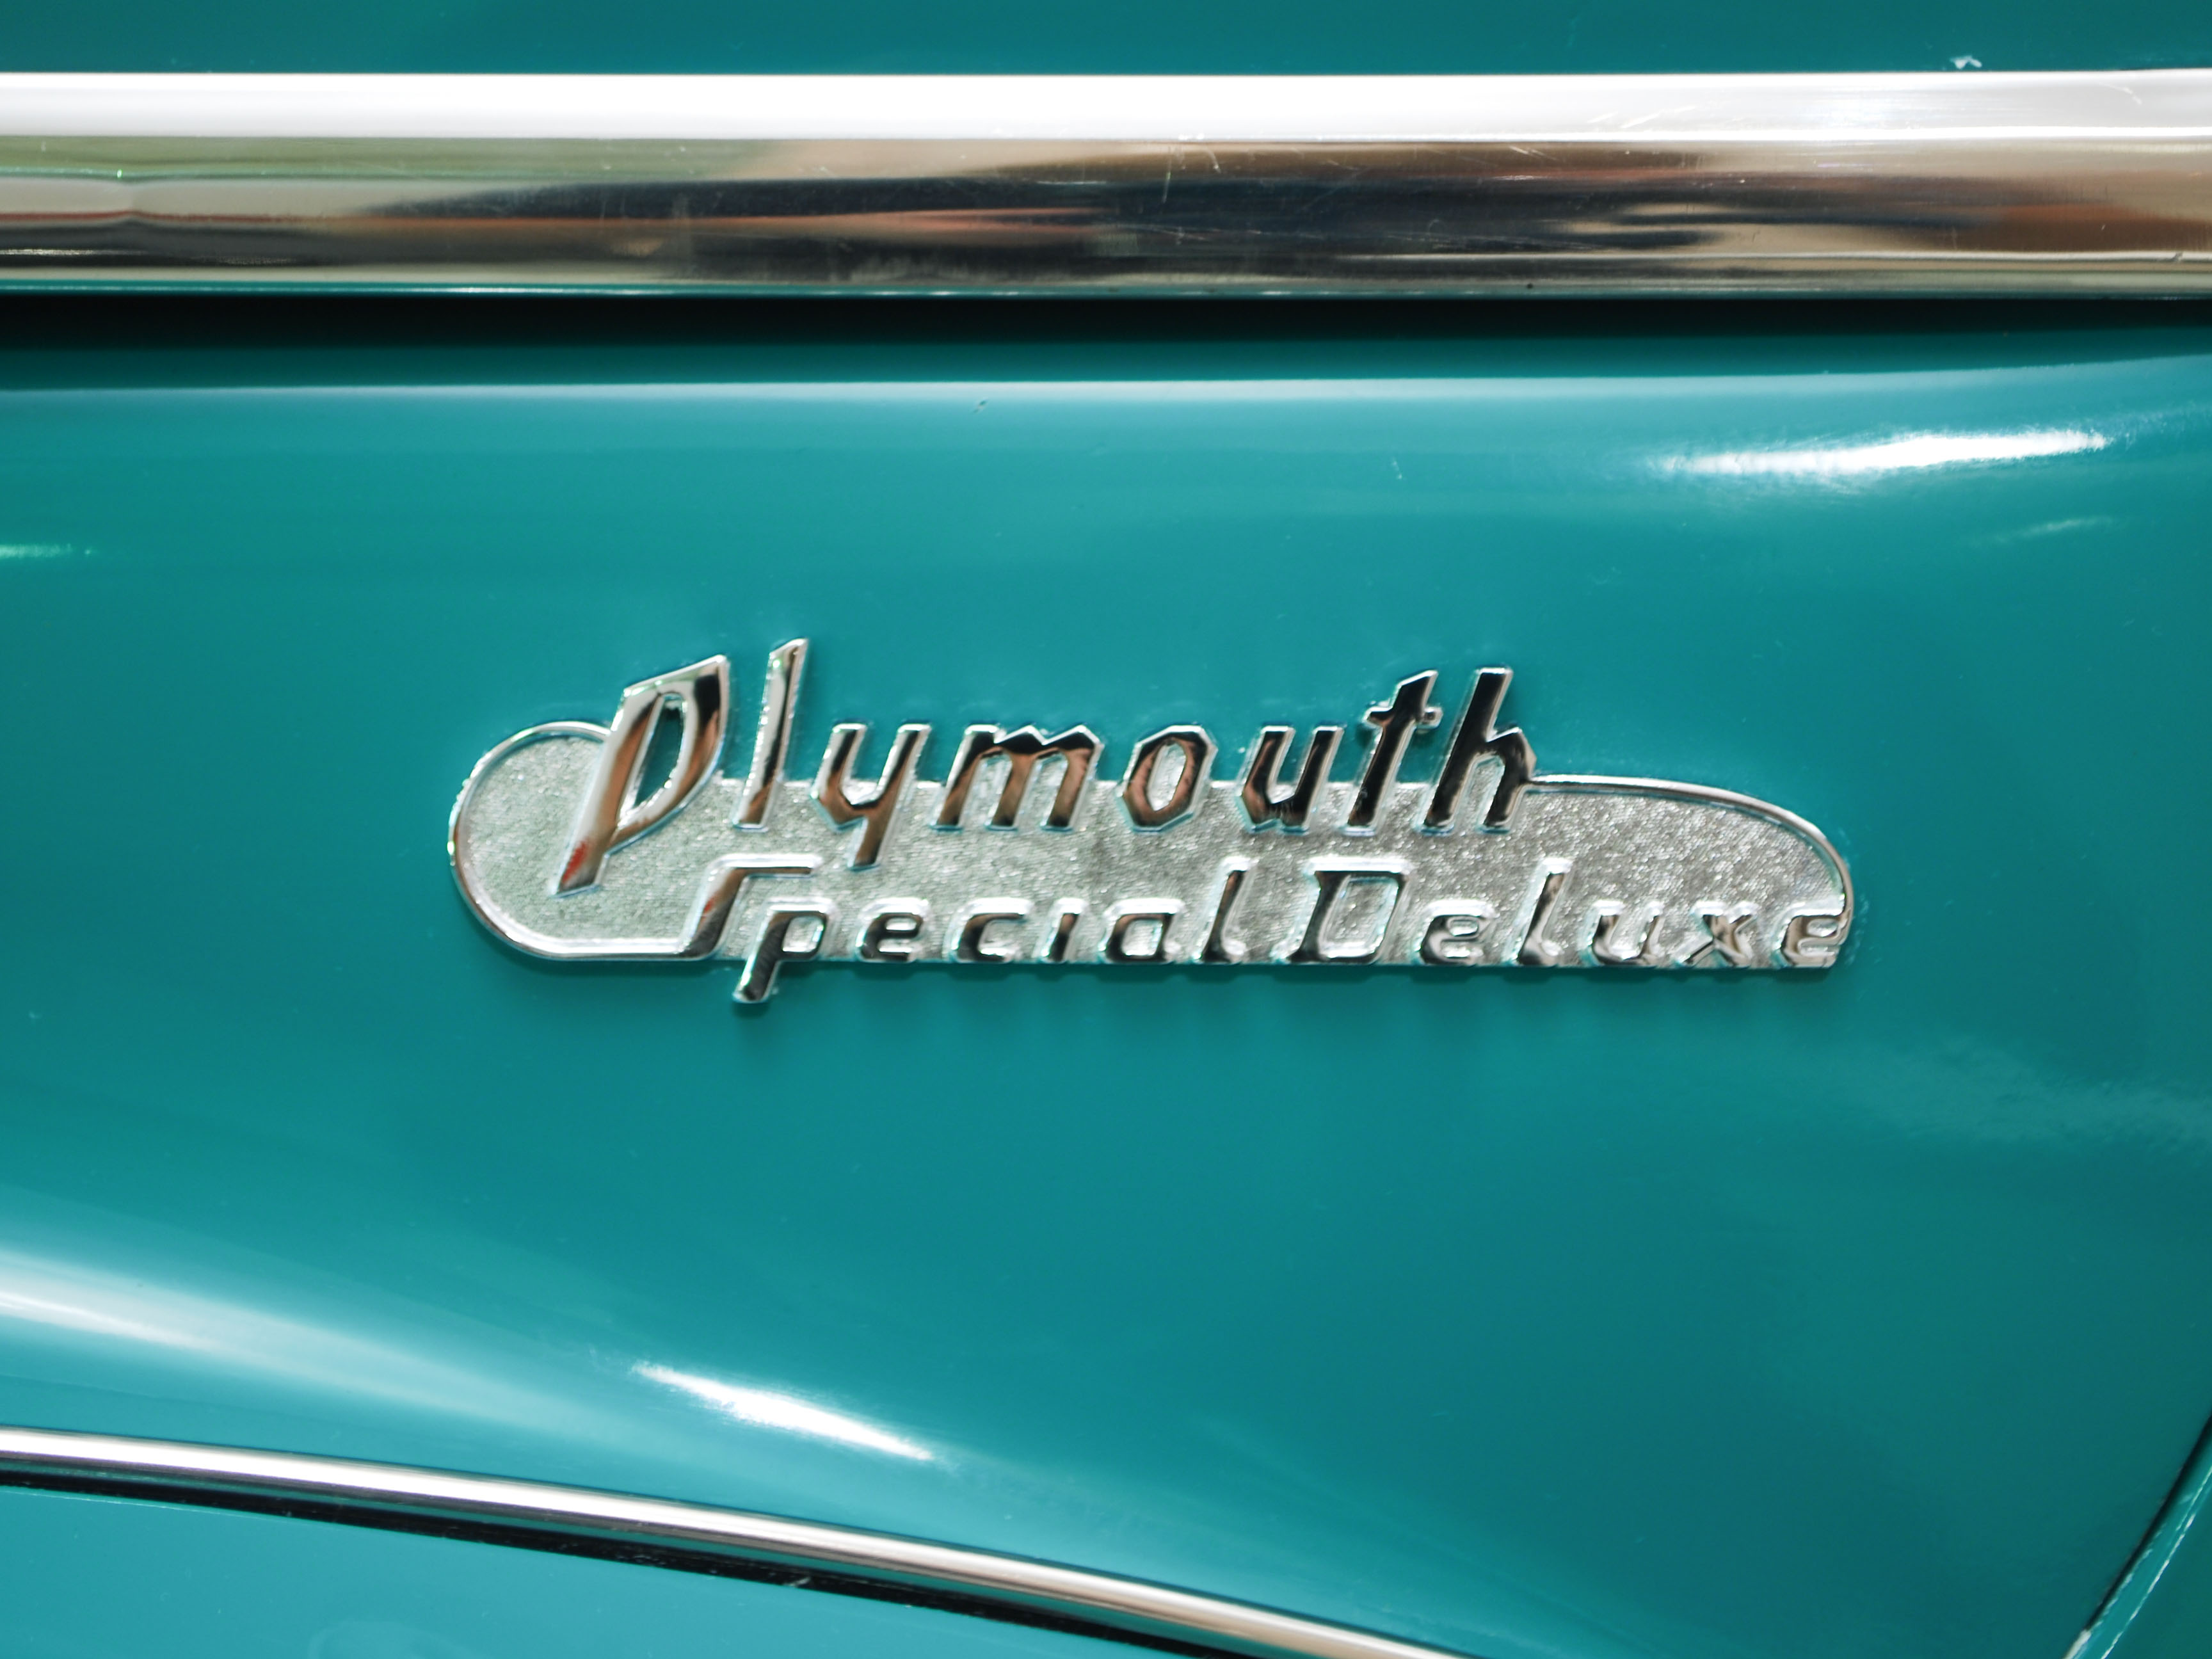 1941 plymouth p11 deluxe